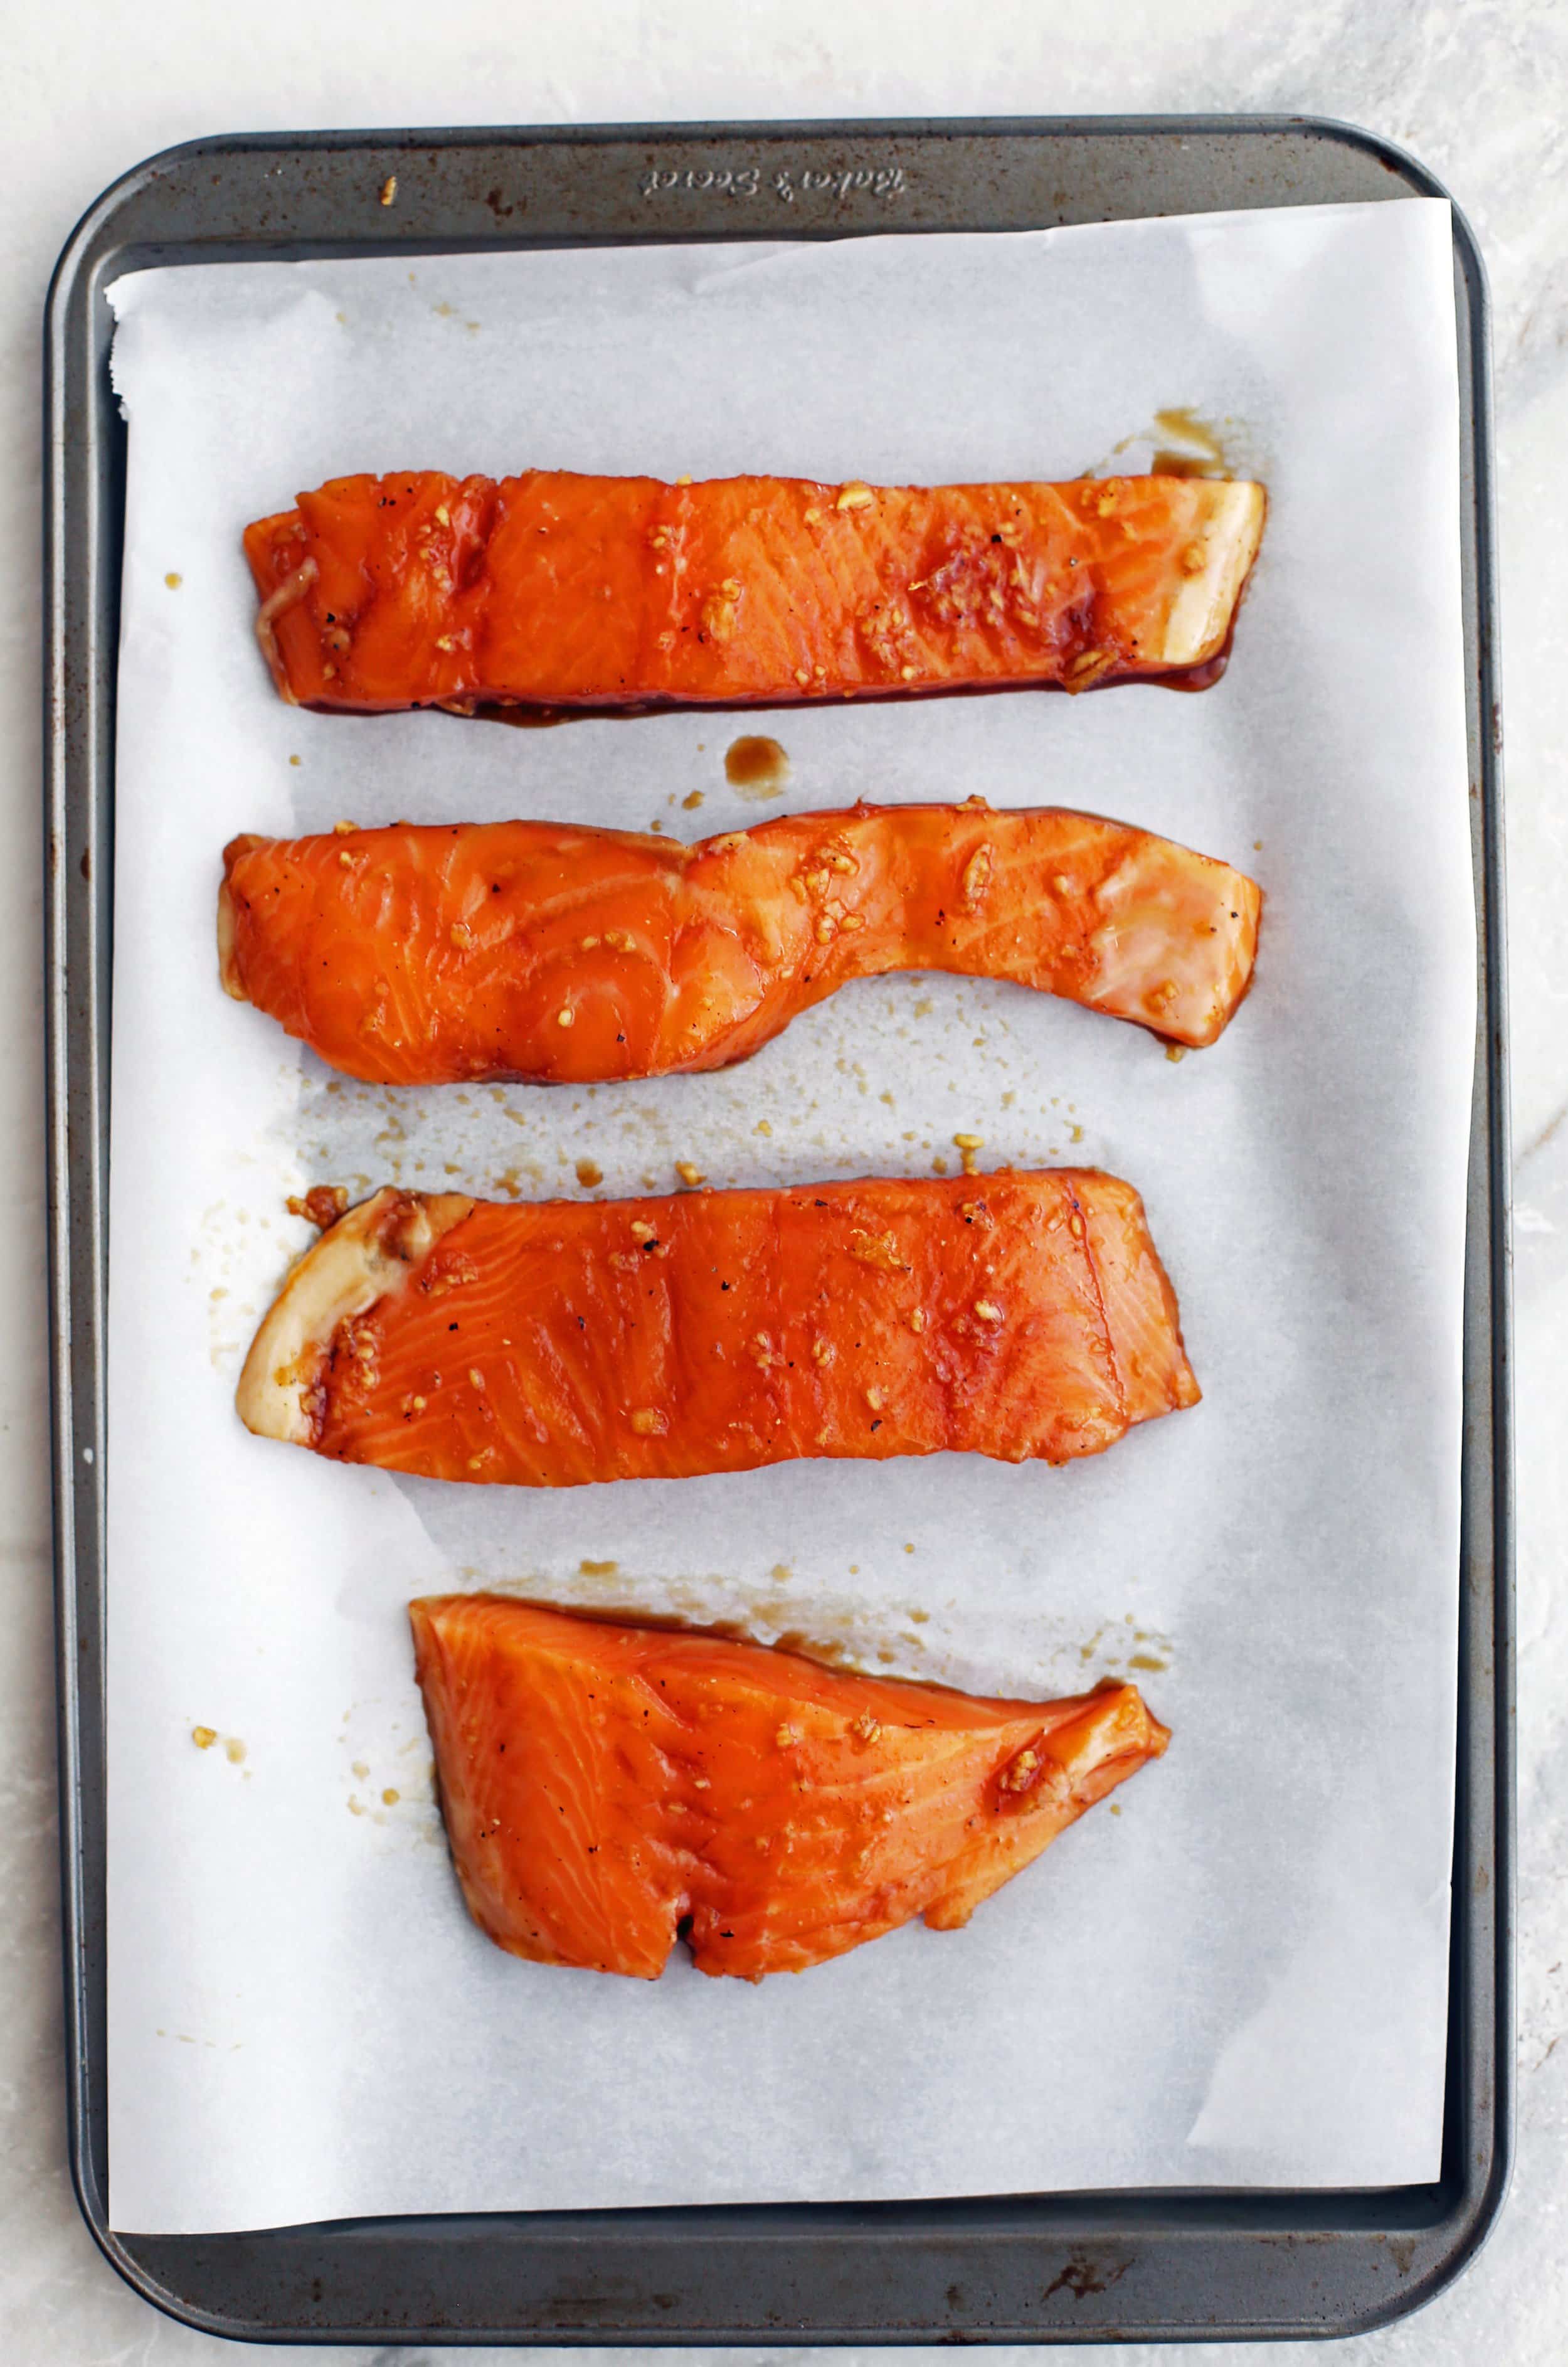 Four maple-soy marinated raw salmon fillets on a baking sheet.